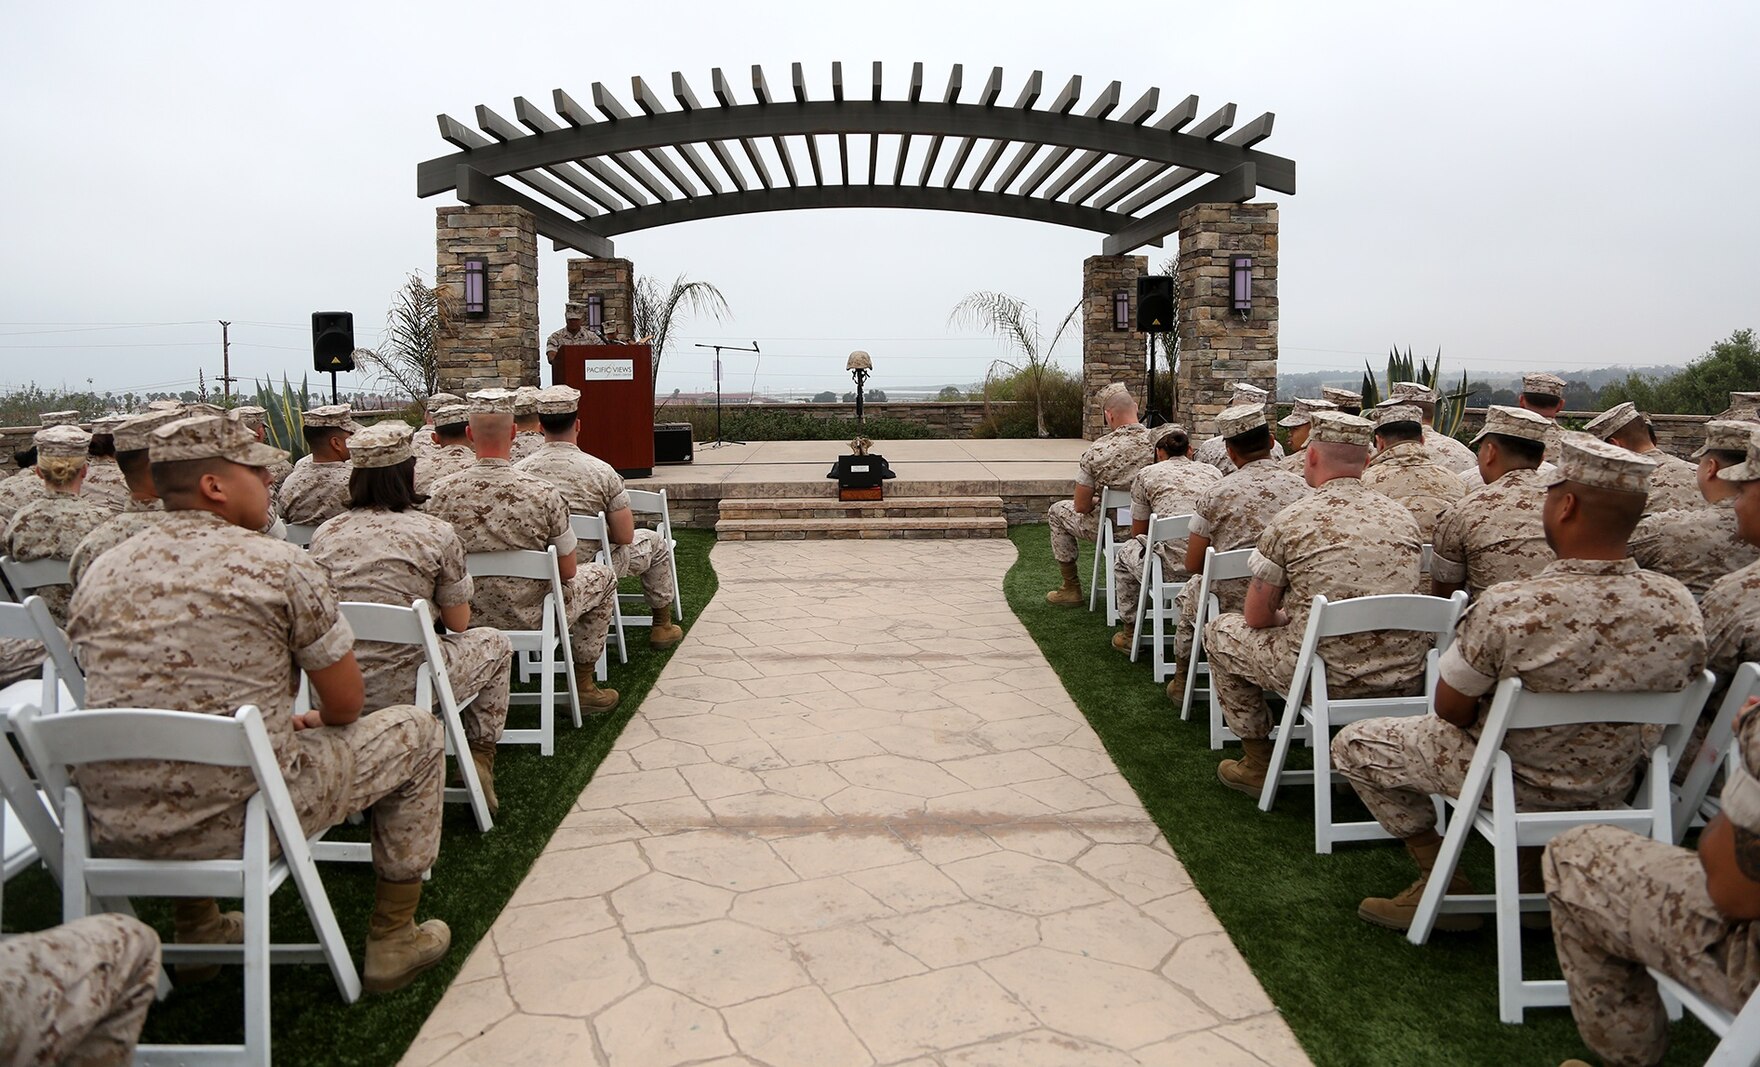 Service members of 1st Medical Battalion, 1st Marine Logistics Group, and distinguished guests, wait for the 117th Hospital Corps Birthday ceremony to begin aboard Camp Pendleton, Calif., June 17, 2015. The Hospital Corps came into existence as an organized unit of the medical department under the provision of an act of congress approved June 17, 1898. The hospital corpsmen work in a wide variety of capacities and locations, including shore establishments such as naval hospitals and clinics, aboard ships, and as the primary medical caregivers for Sailors and Marines while underway and forward deployed. (U.S. Marine Corps photo by Sgt. Laura Gauna/ Released)